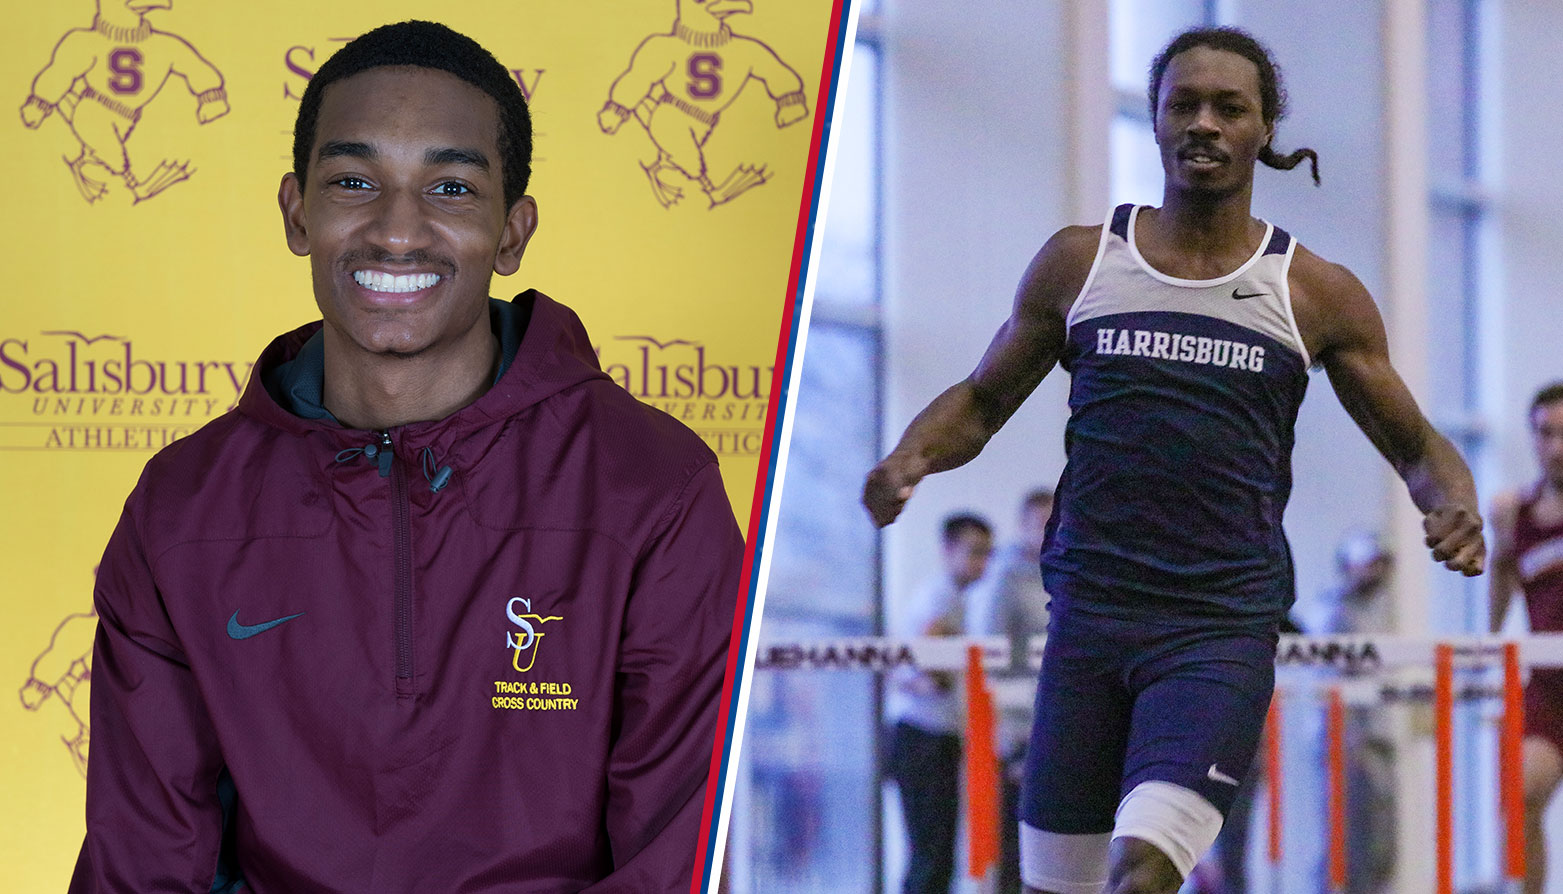 Penn State Harrisburg's Jalil Clayton and Salisbury's Jeffrey McInnis Named CAC Men's Track & Field Athletes of the Week